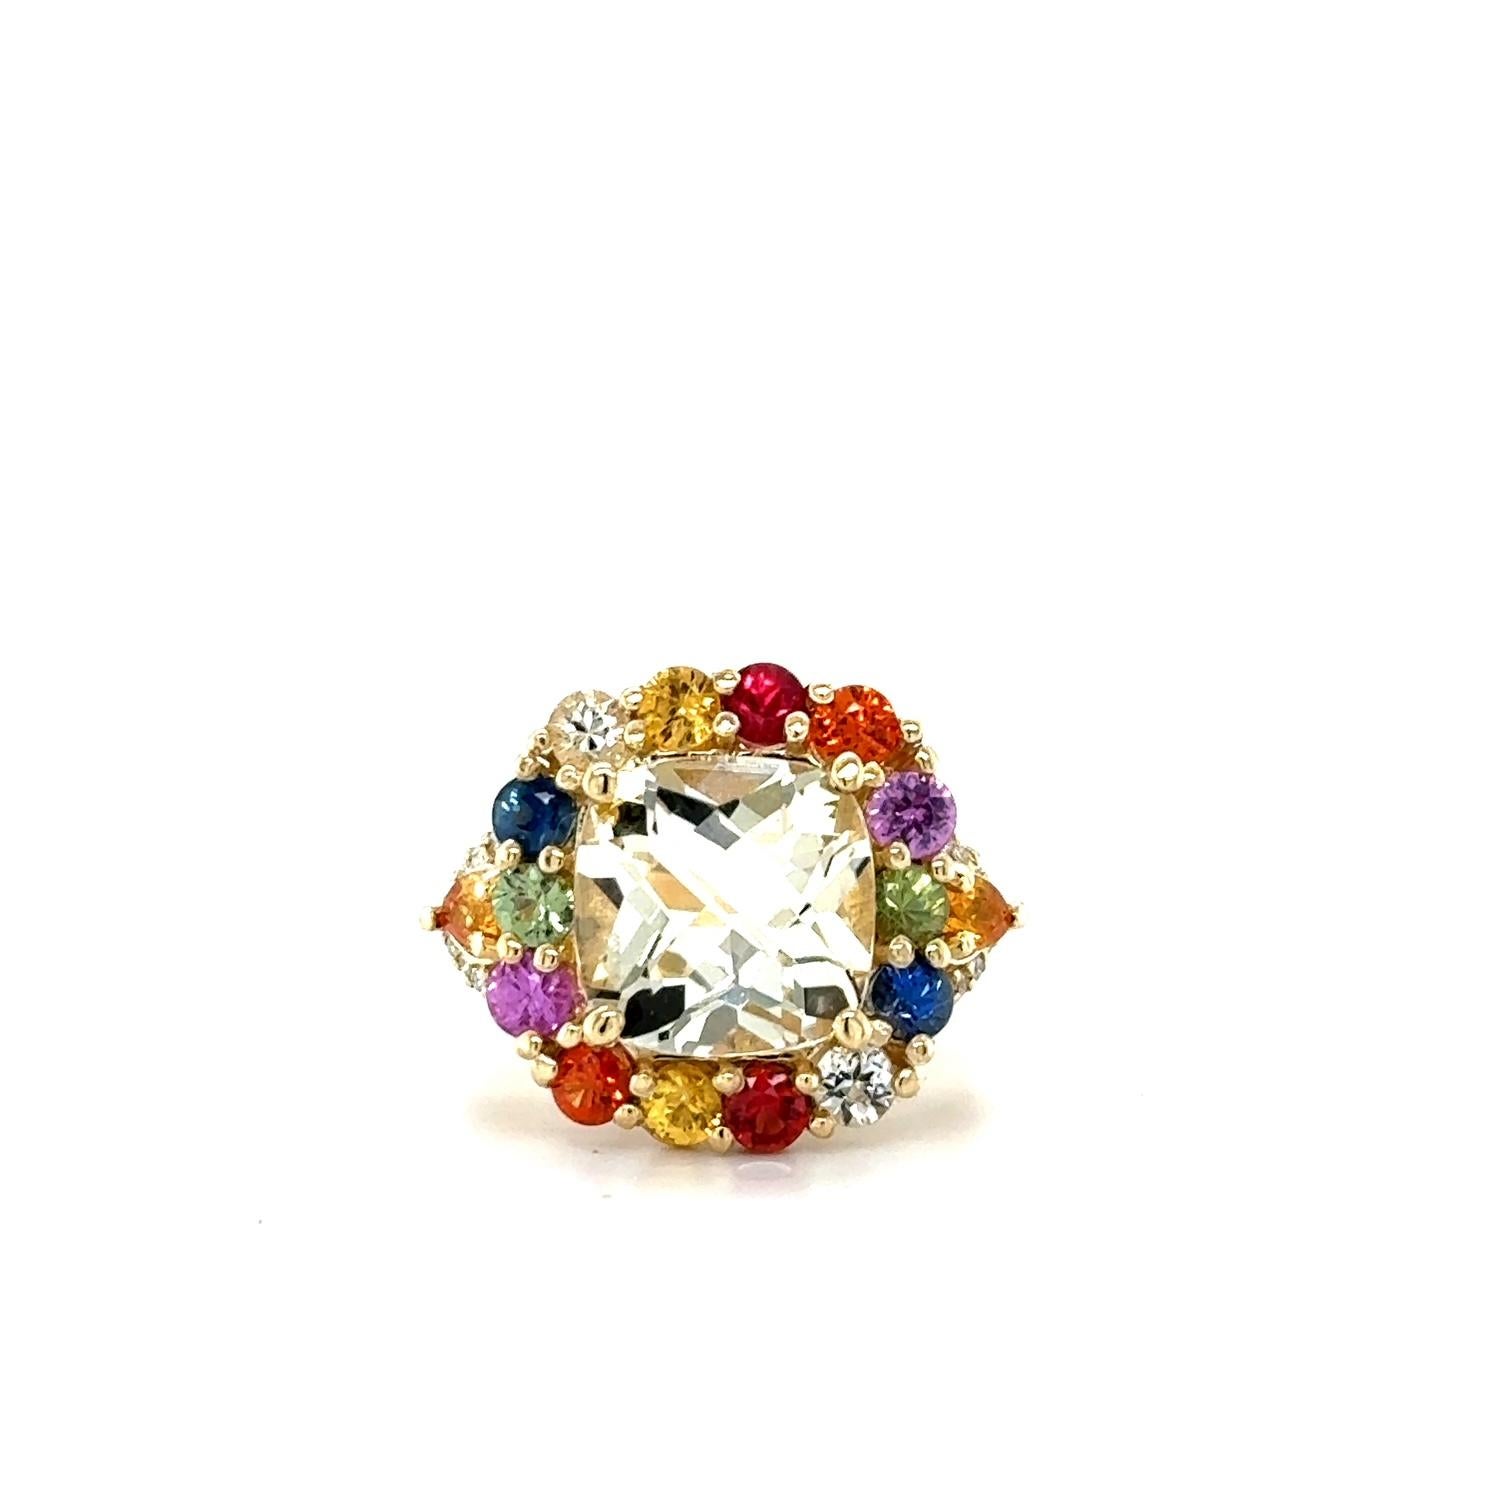 7.90 Carat Citrine Multi-Color Sapphire Diamond Yellow Gold Cocktail Ring

This gorgeous ring has a beautiful Cushion Cut Champagne Citrine Quartz weighing 4.73 Carats and is surrounded by 14 Multi-Color Sapphires weighing 2.20 Carats and 26 Round